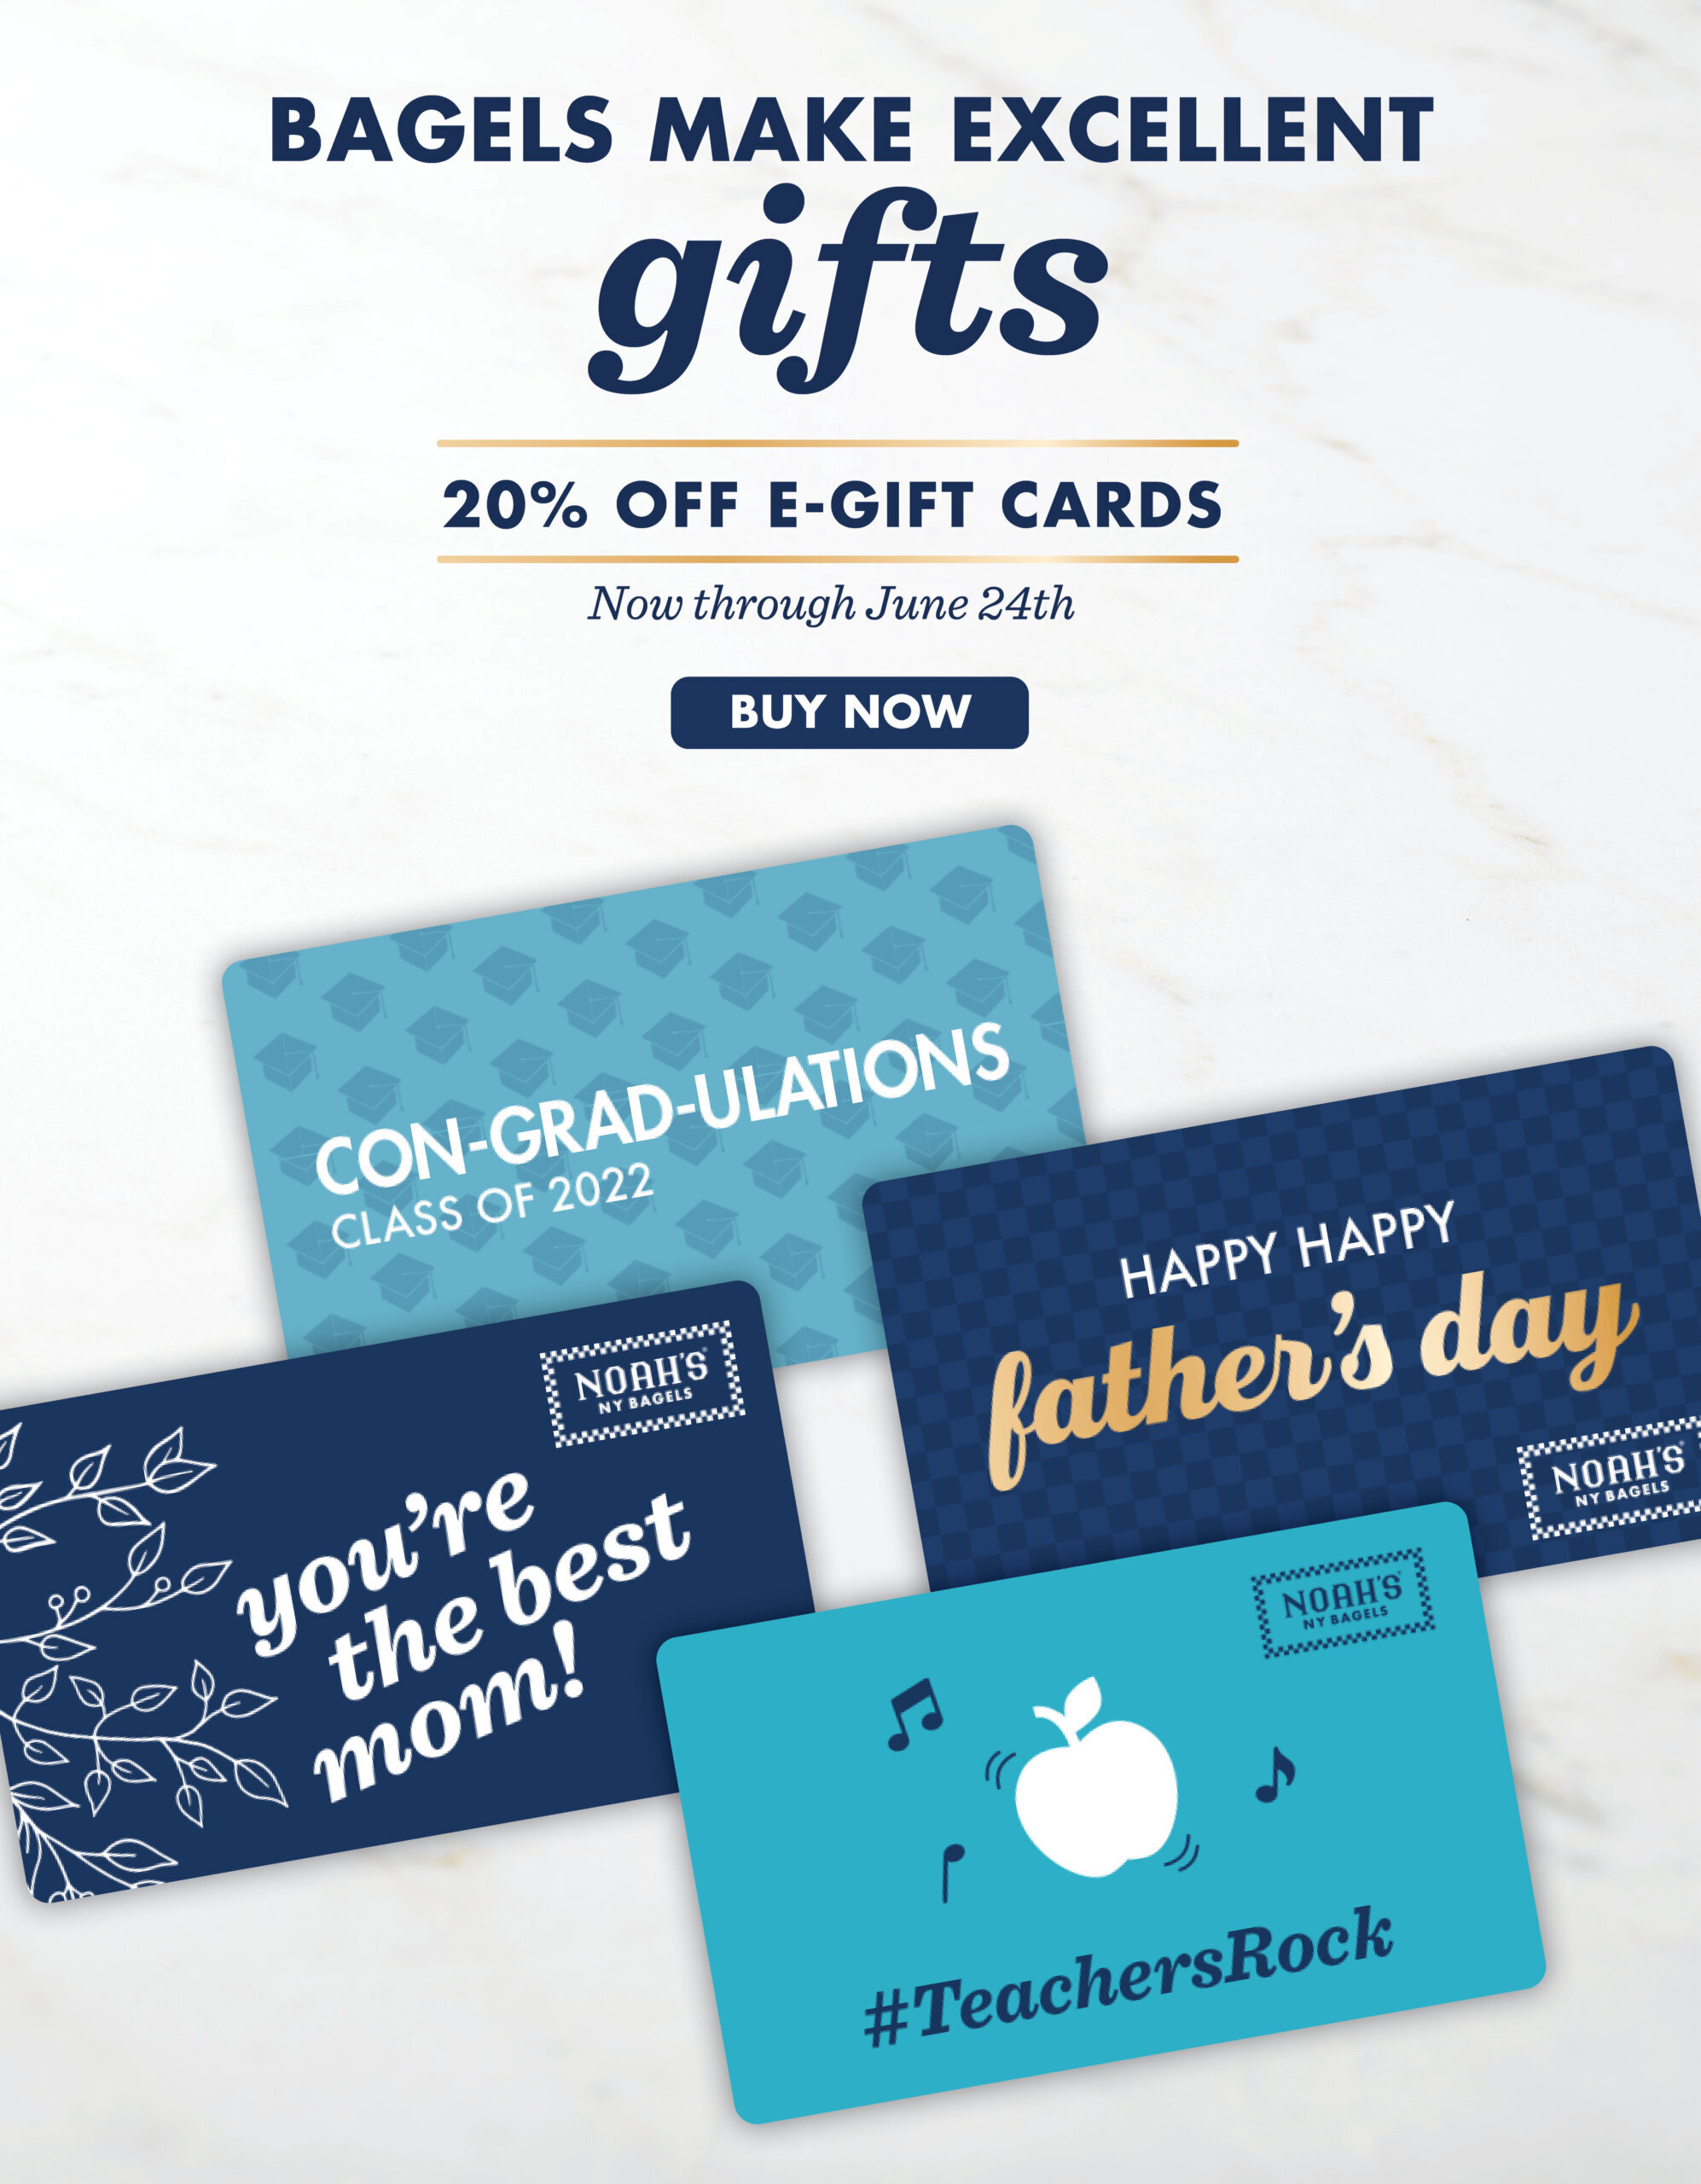 Bagels make excellent gifts. Tap to get 20% off mom, dad, grad and teacher e-gift cards now through June 24th.